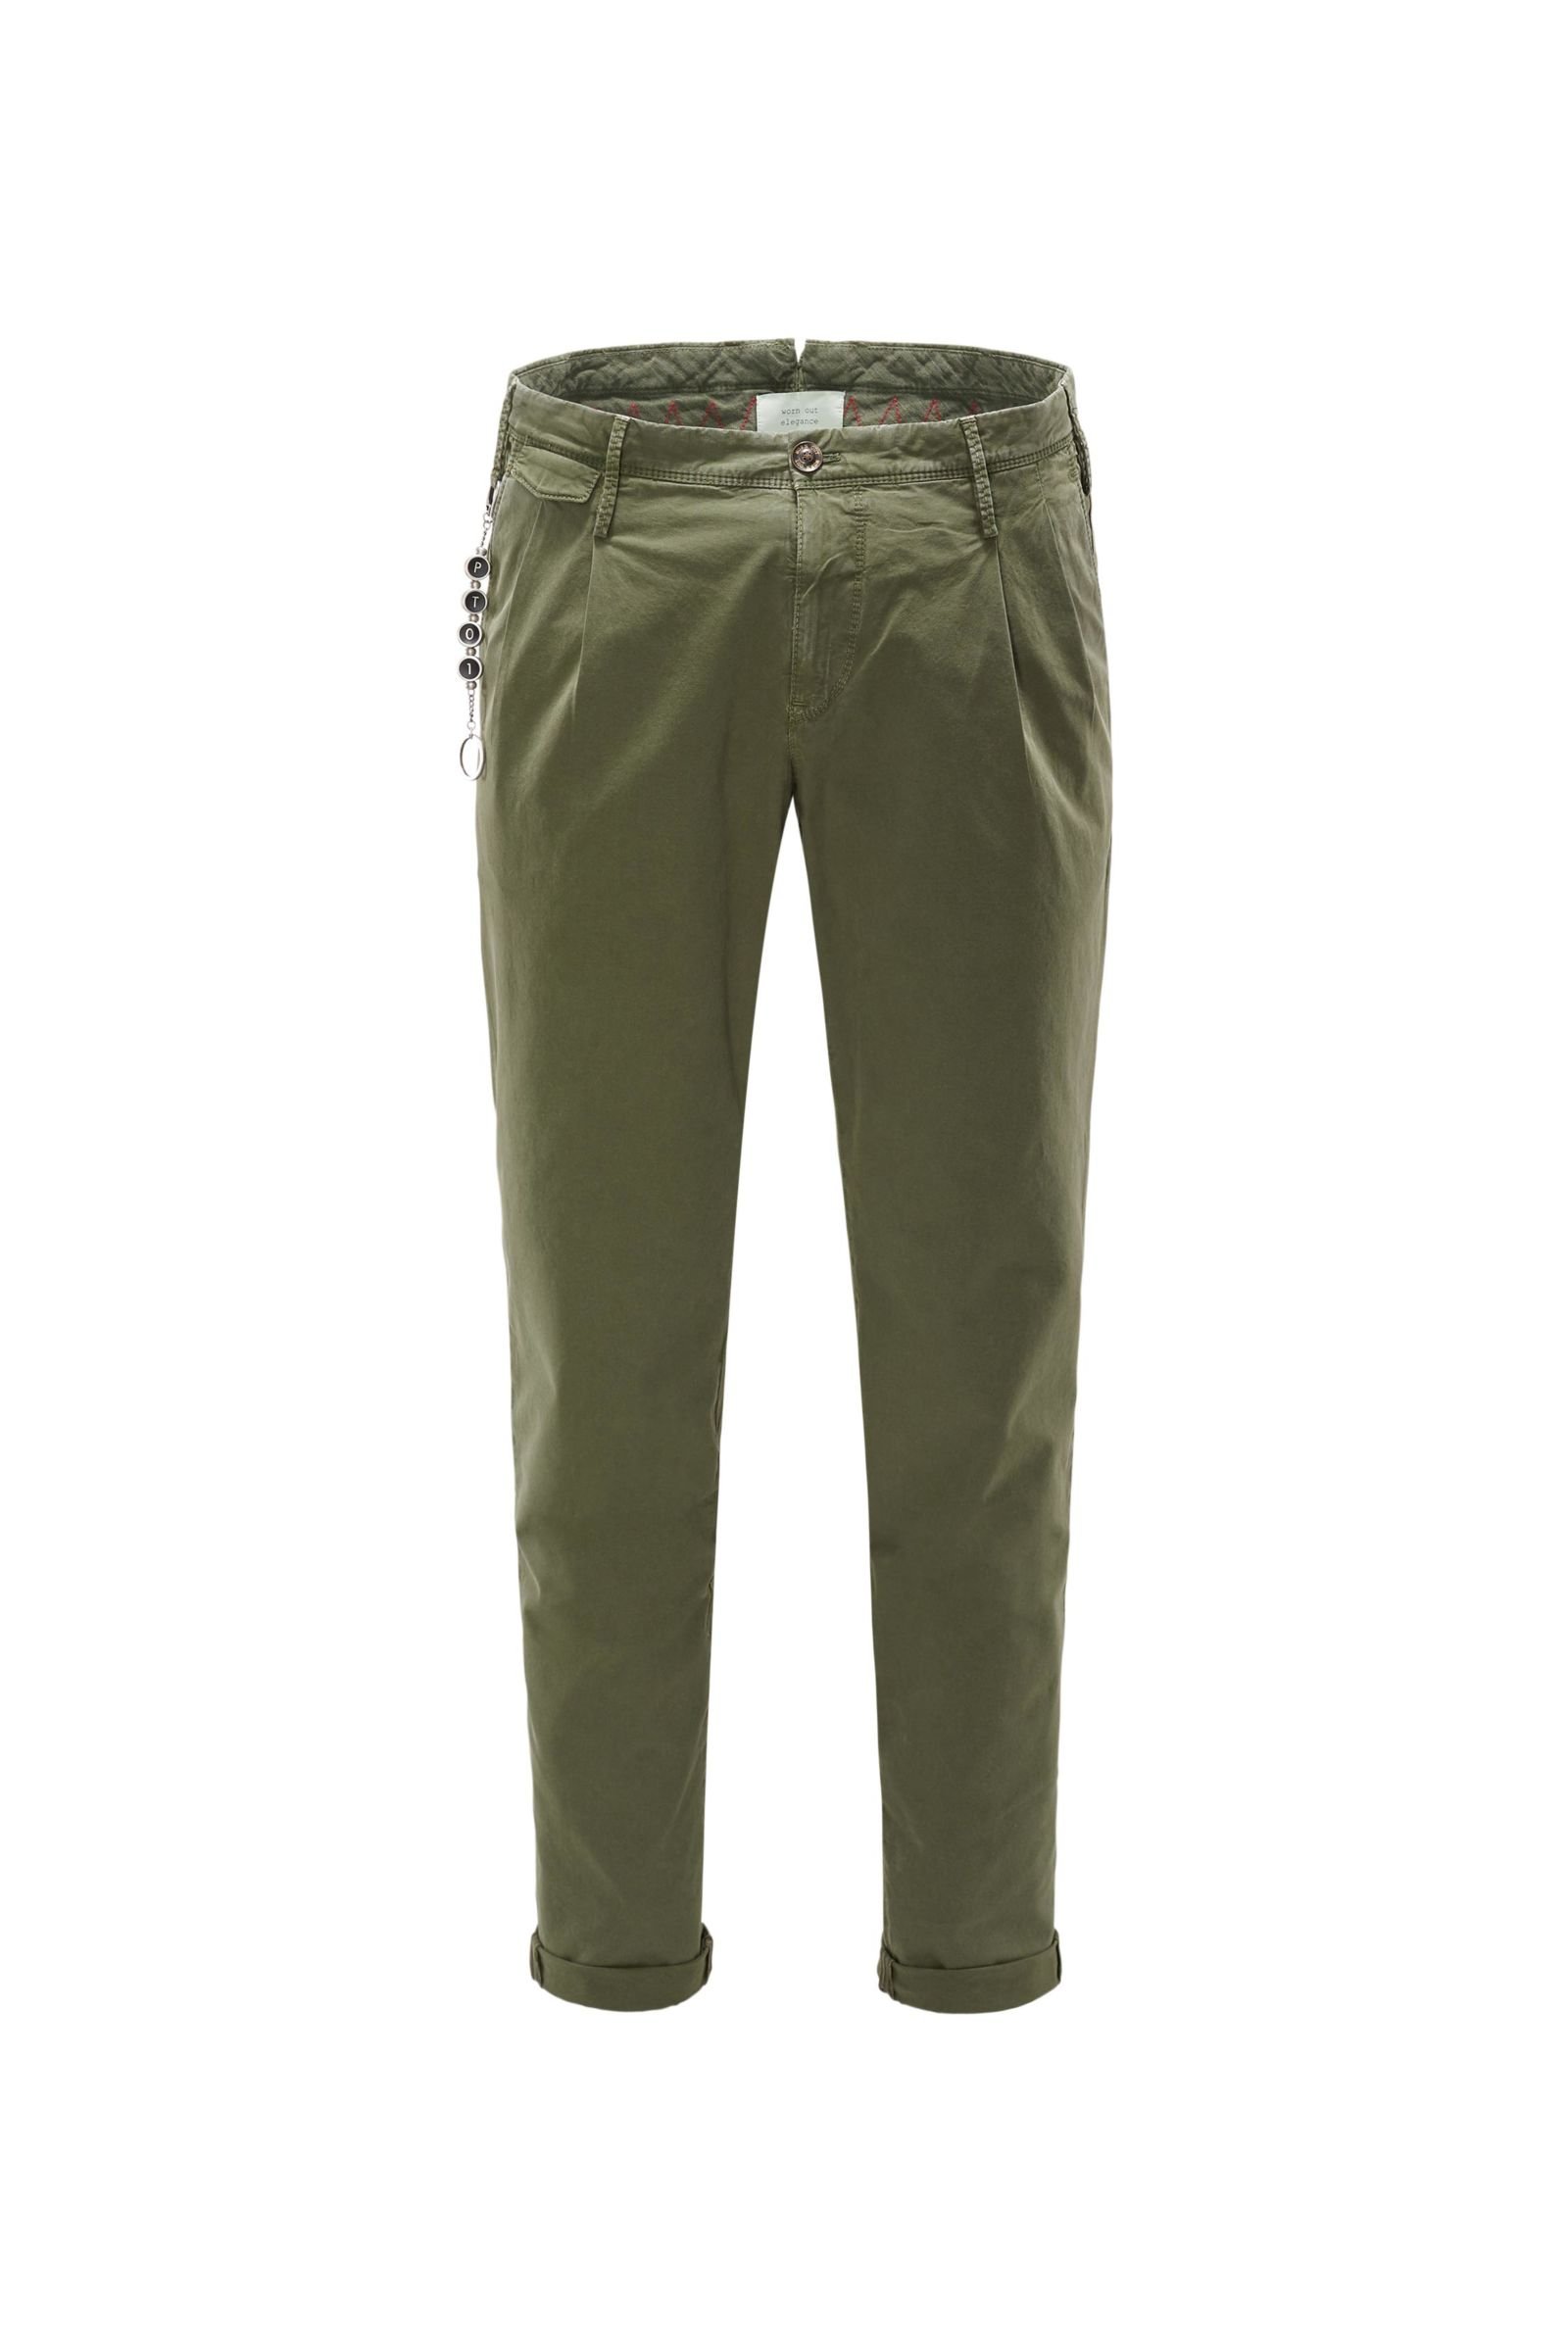 Cotton trousers 'Worn out Elegance' olive